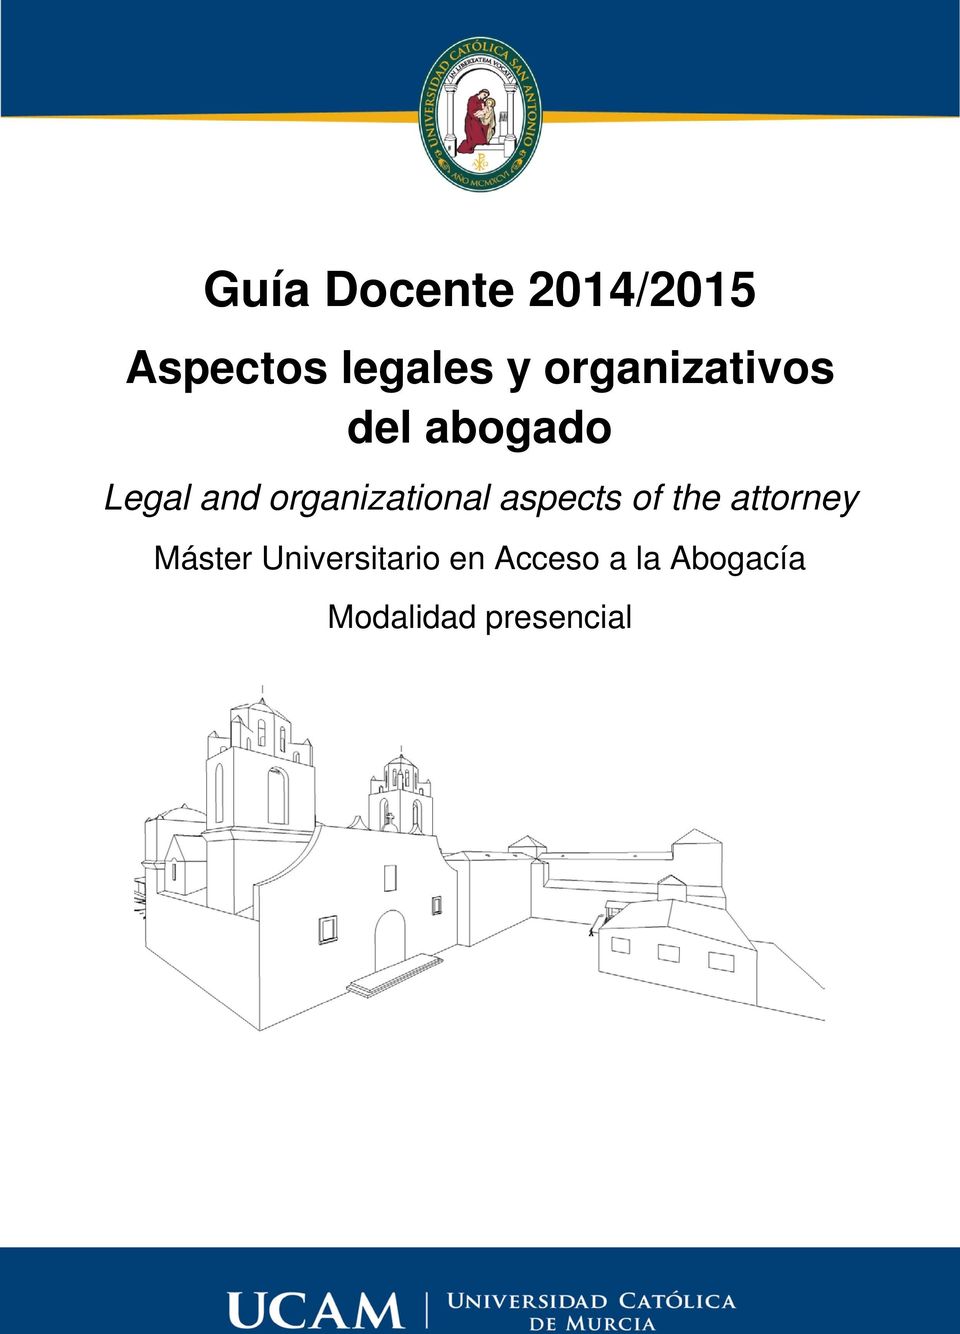 organizational aspects of the attorney Máster